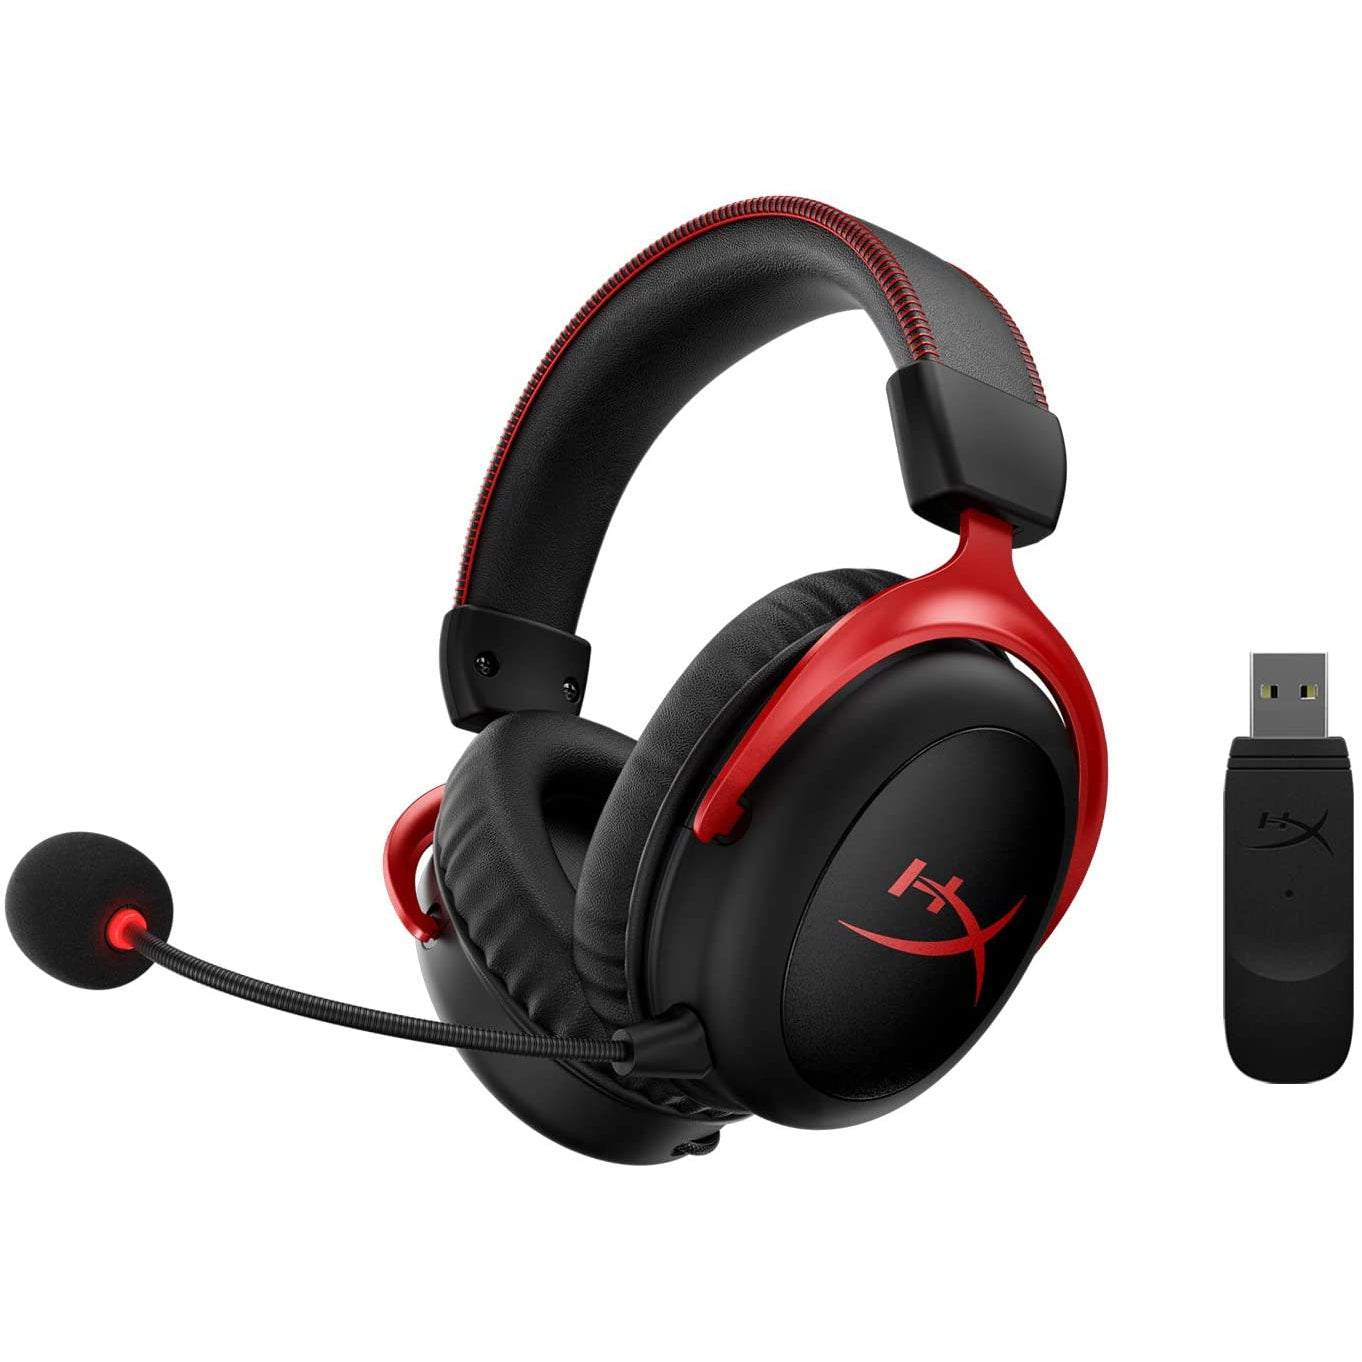 HyperX Cloud II Wireless Gaming Headset for PC, PS4, PS5, Nintendo Switch - Refurbished Excellent